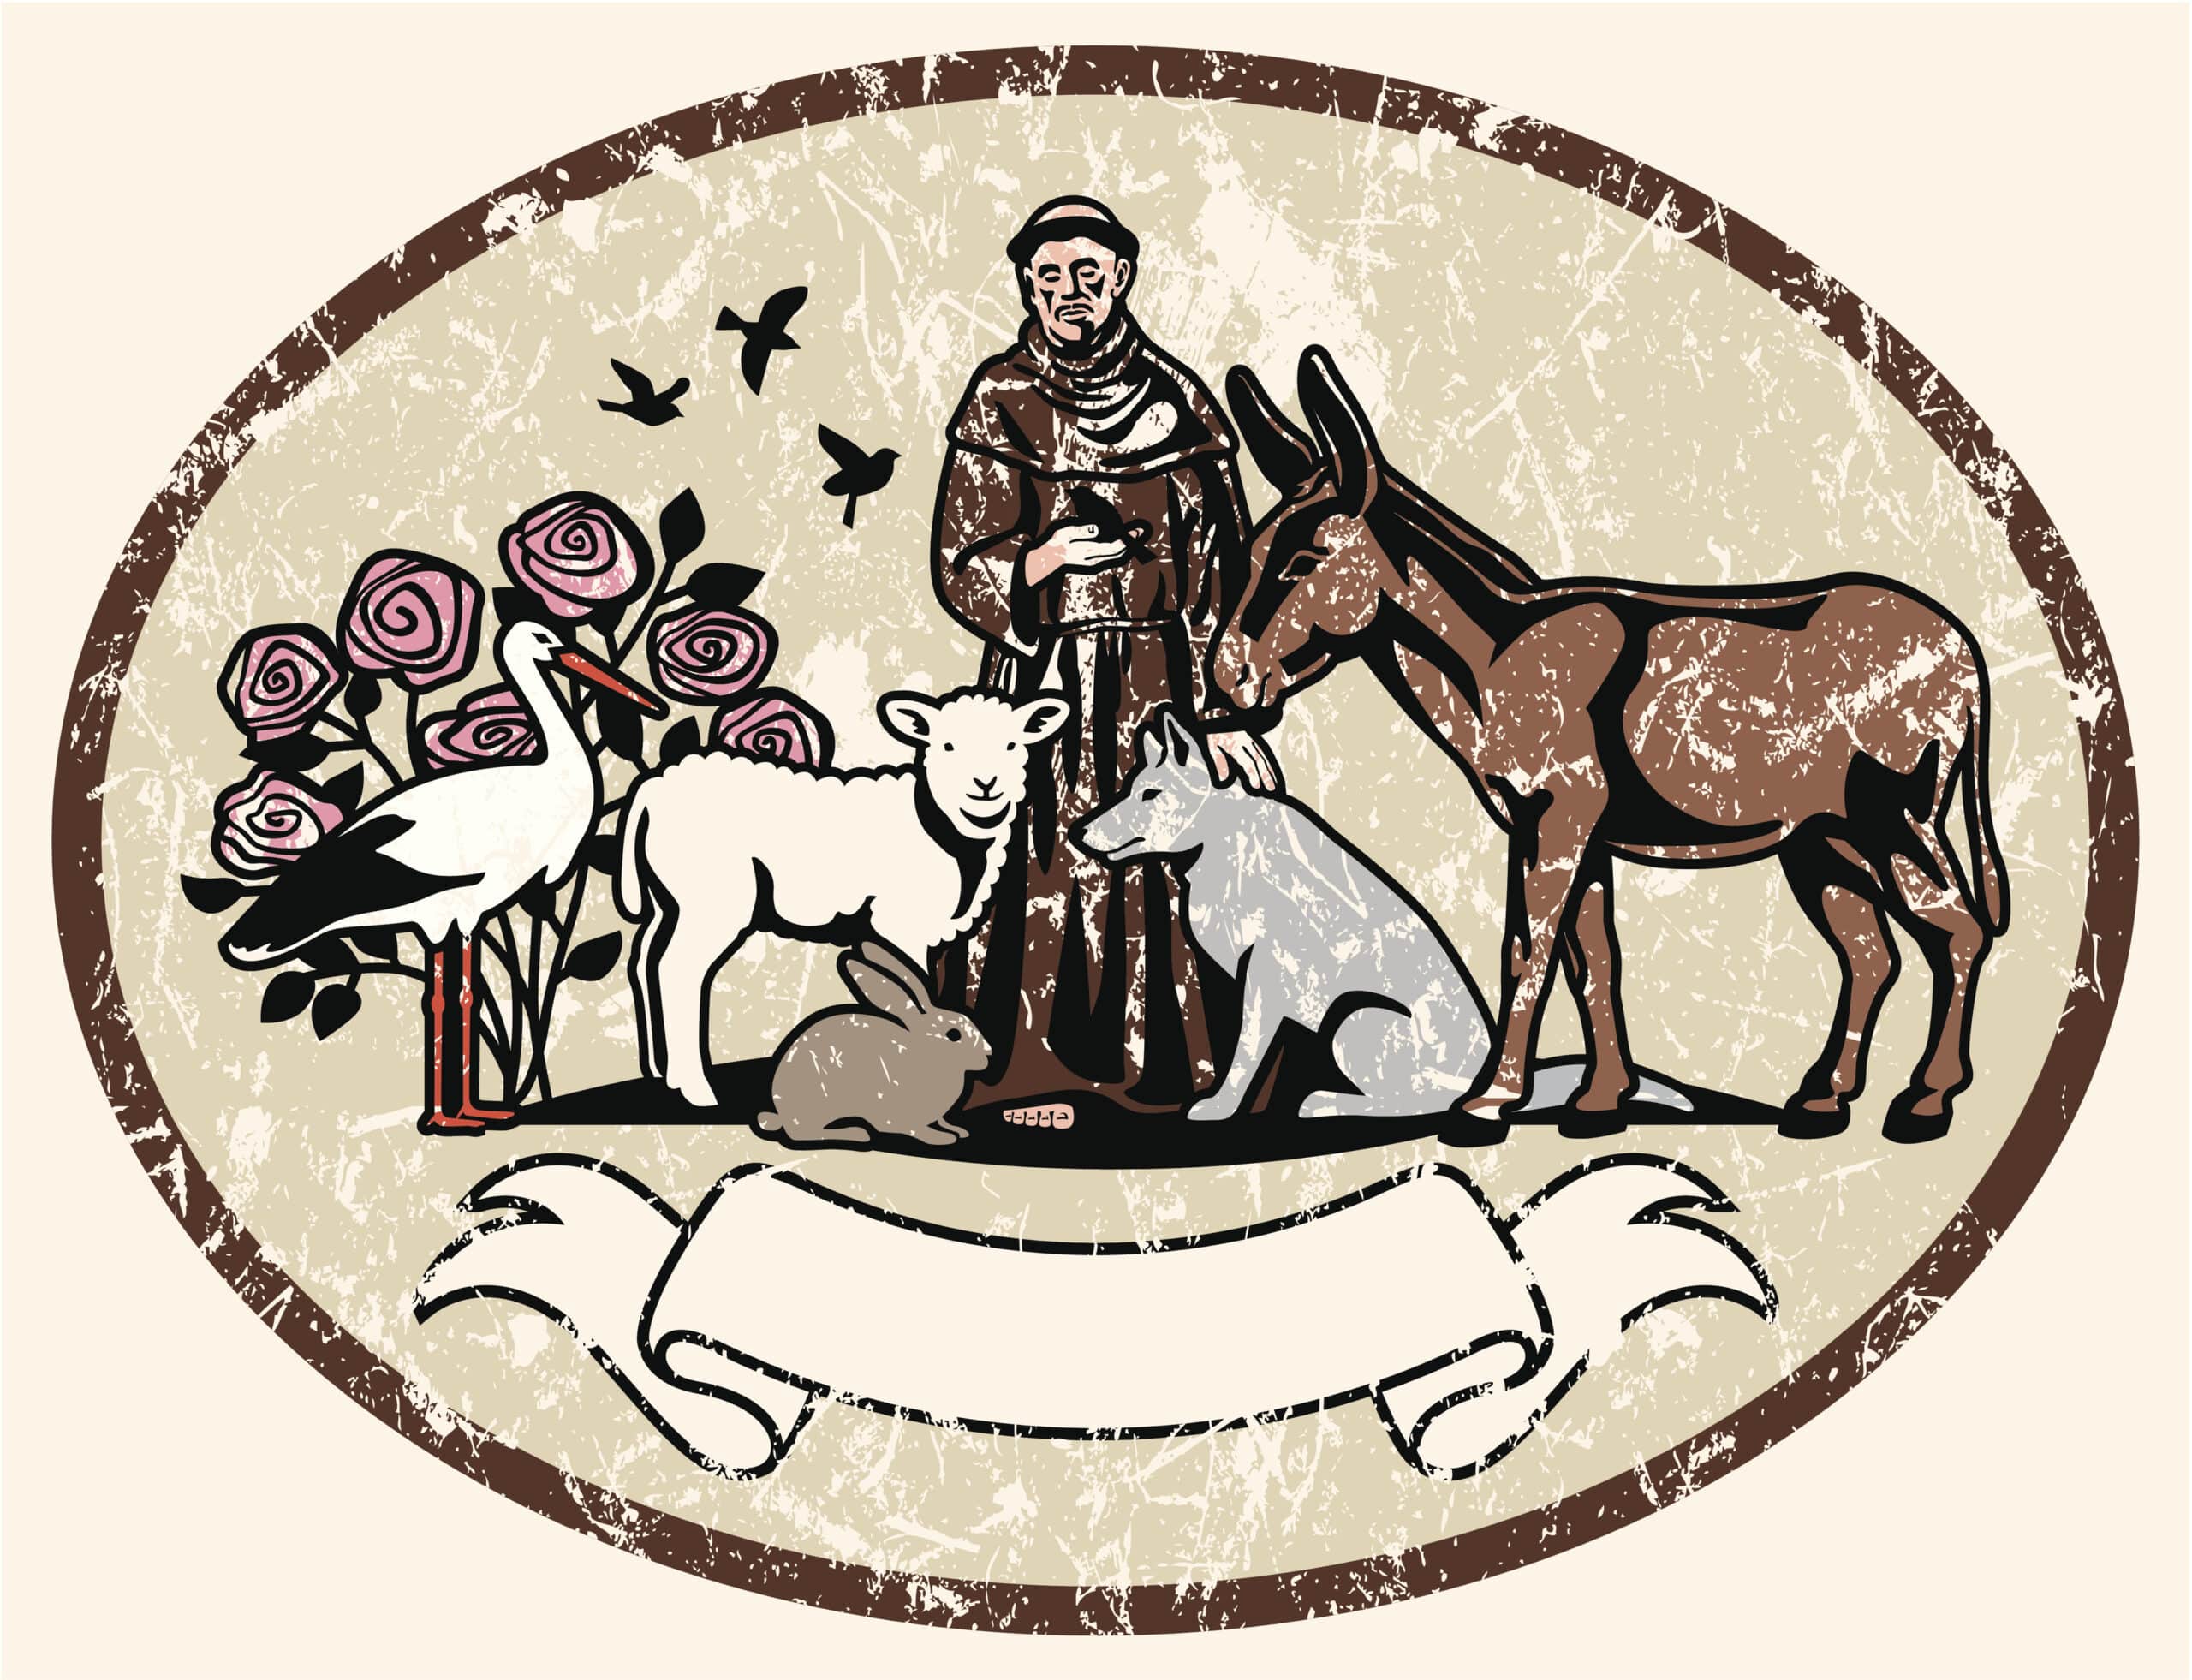 St. Francis of Assisi - the patron saint of animals. The elements are a separate grouping from the background, so easily used elsewhere.